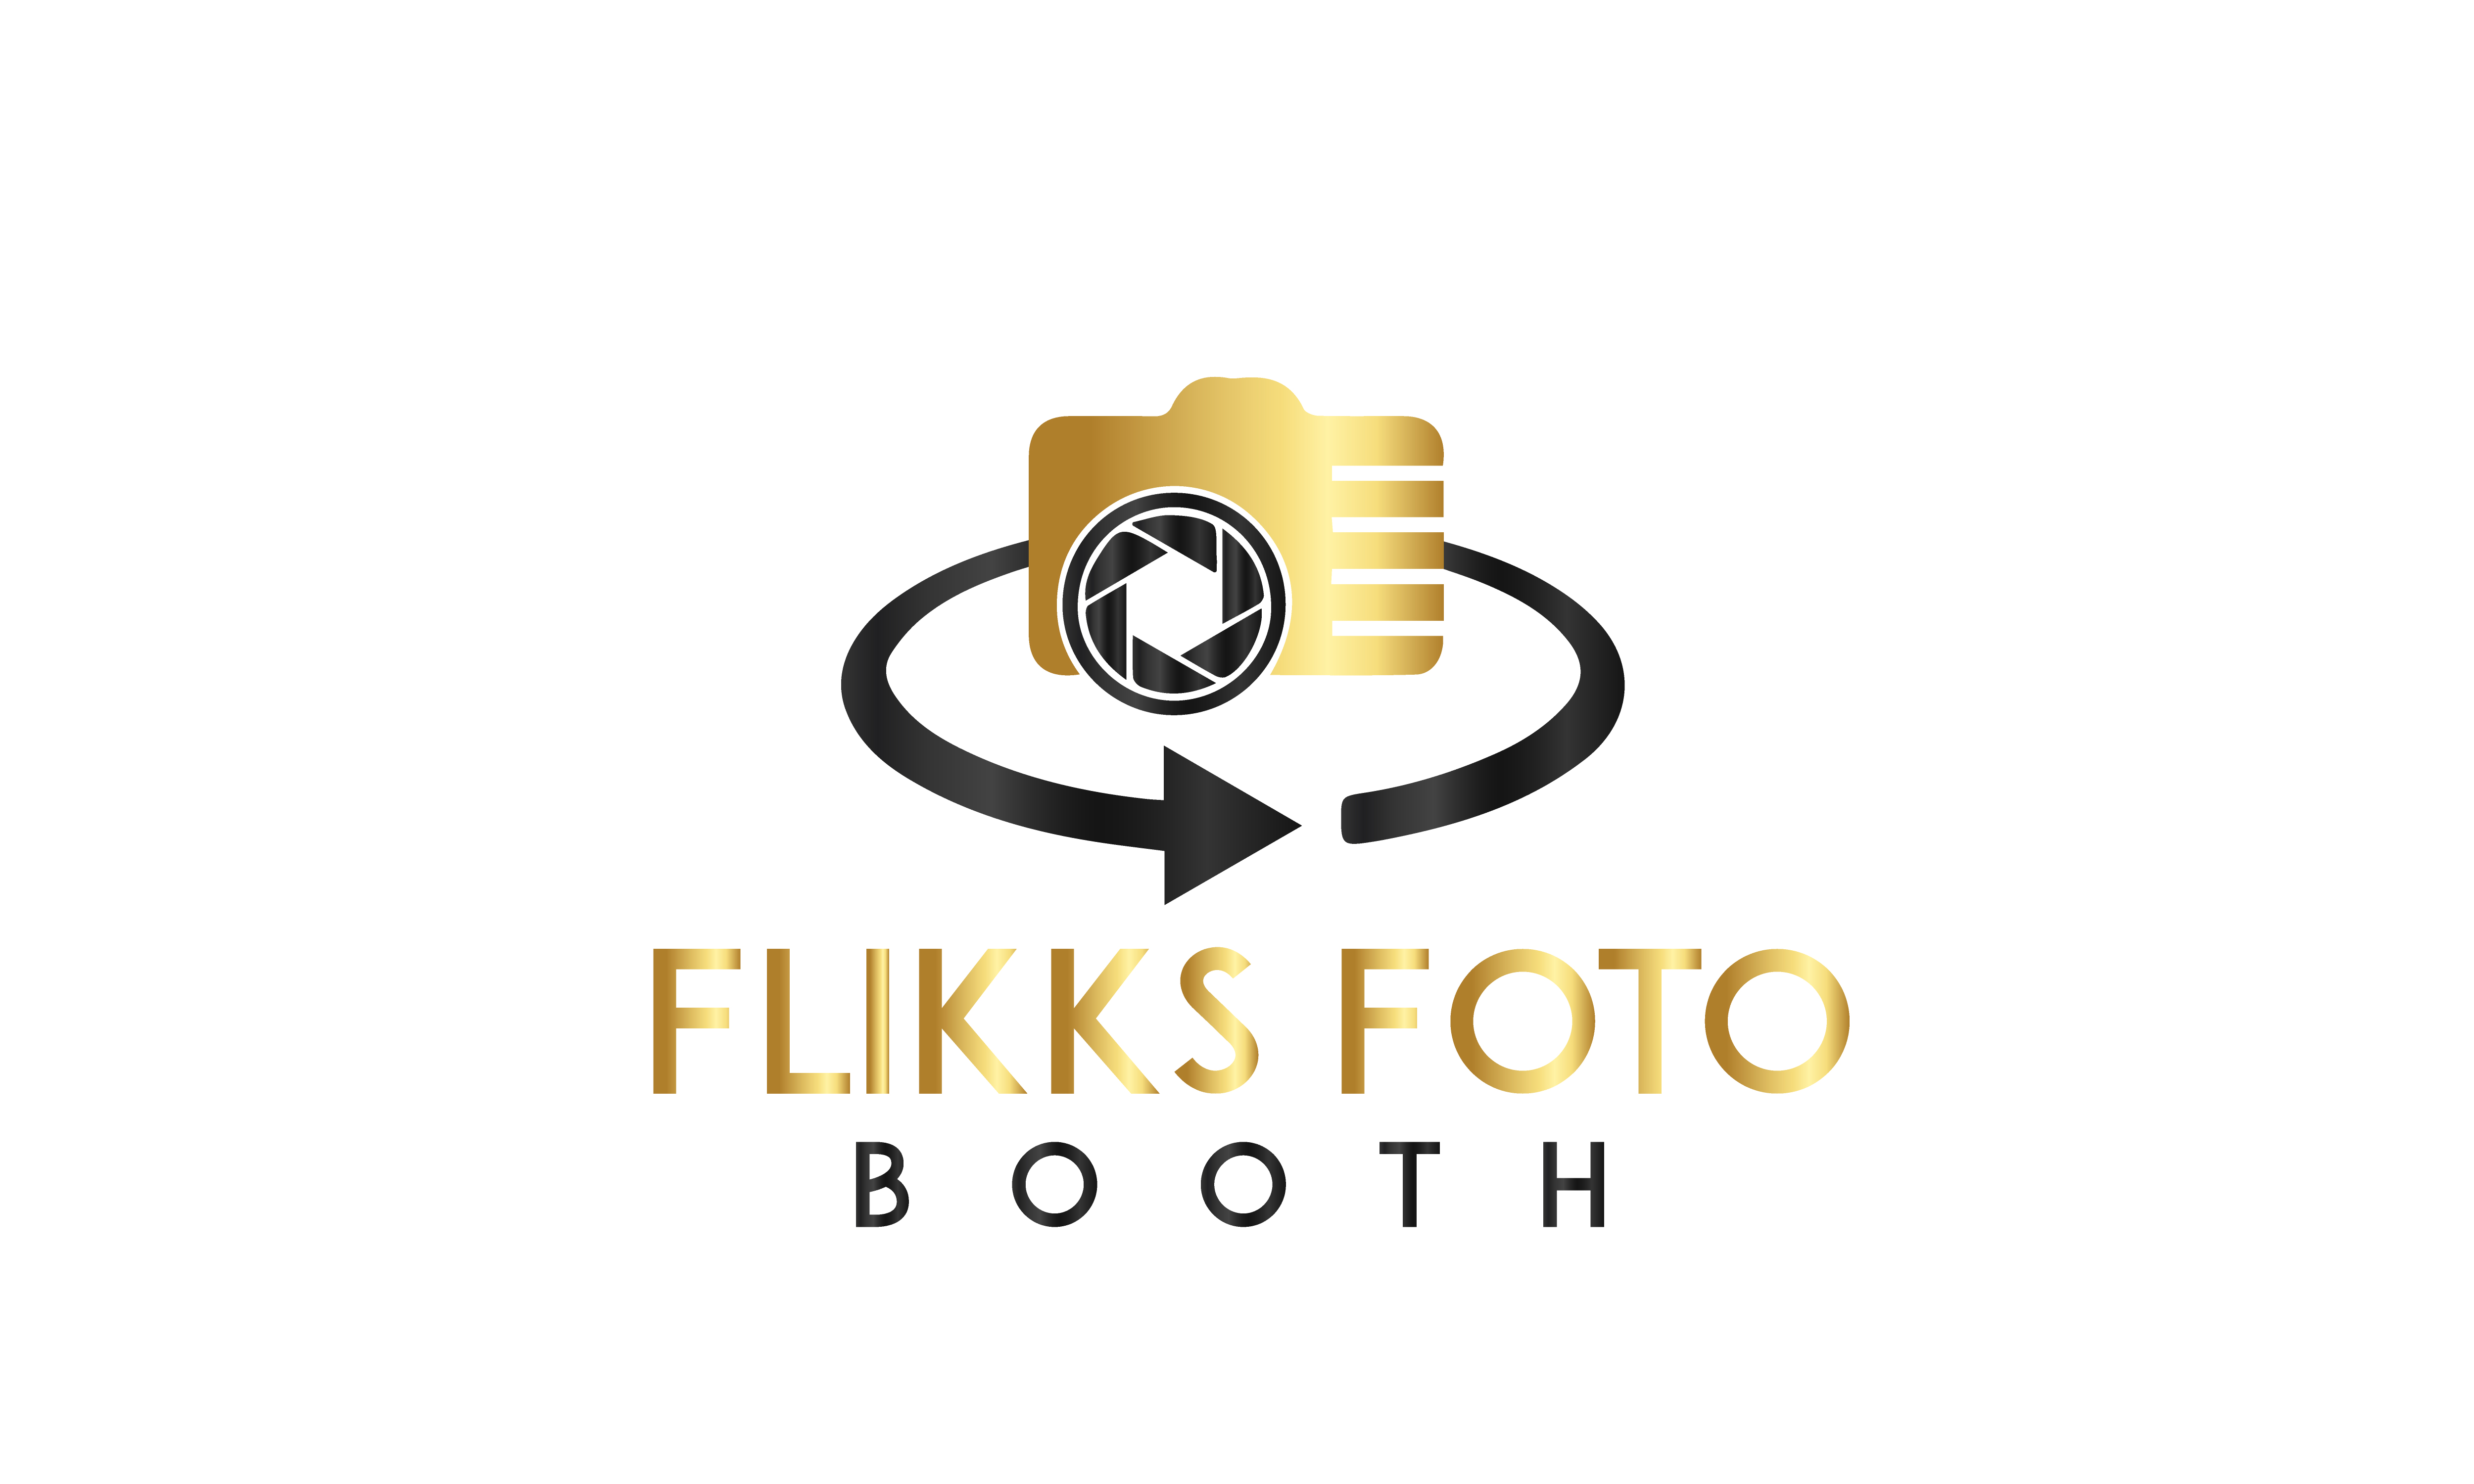 The logo or business face of "FLIKKS FOTO BOOTH "